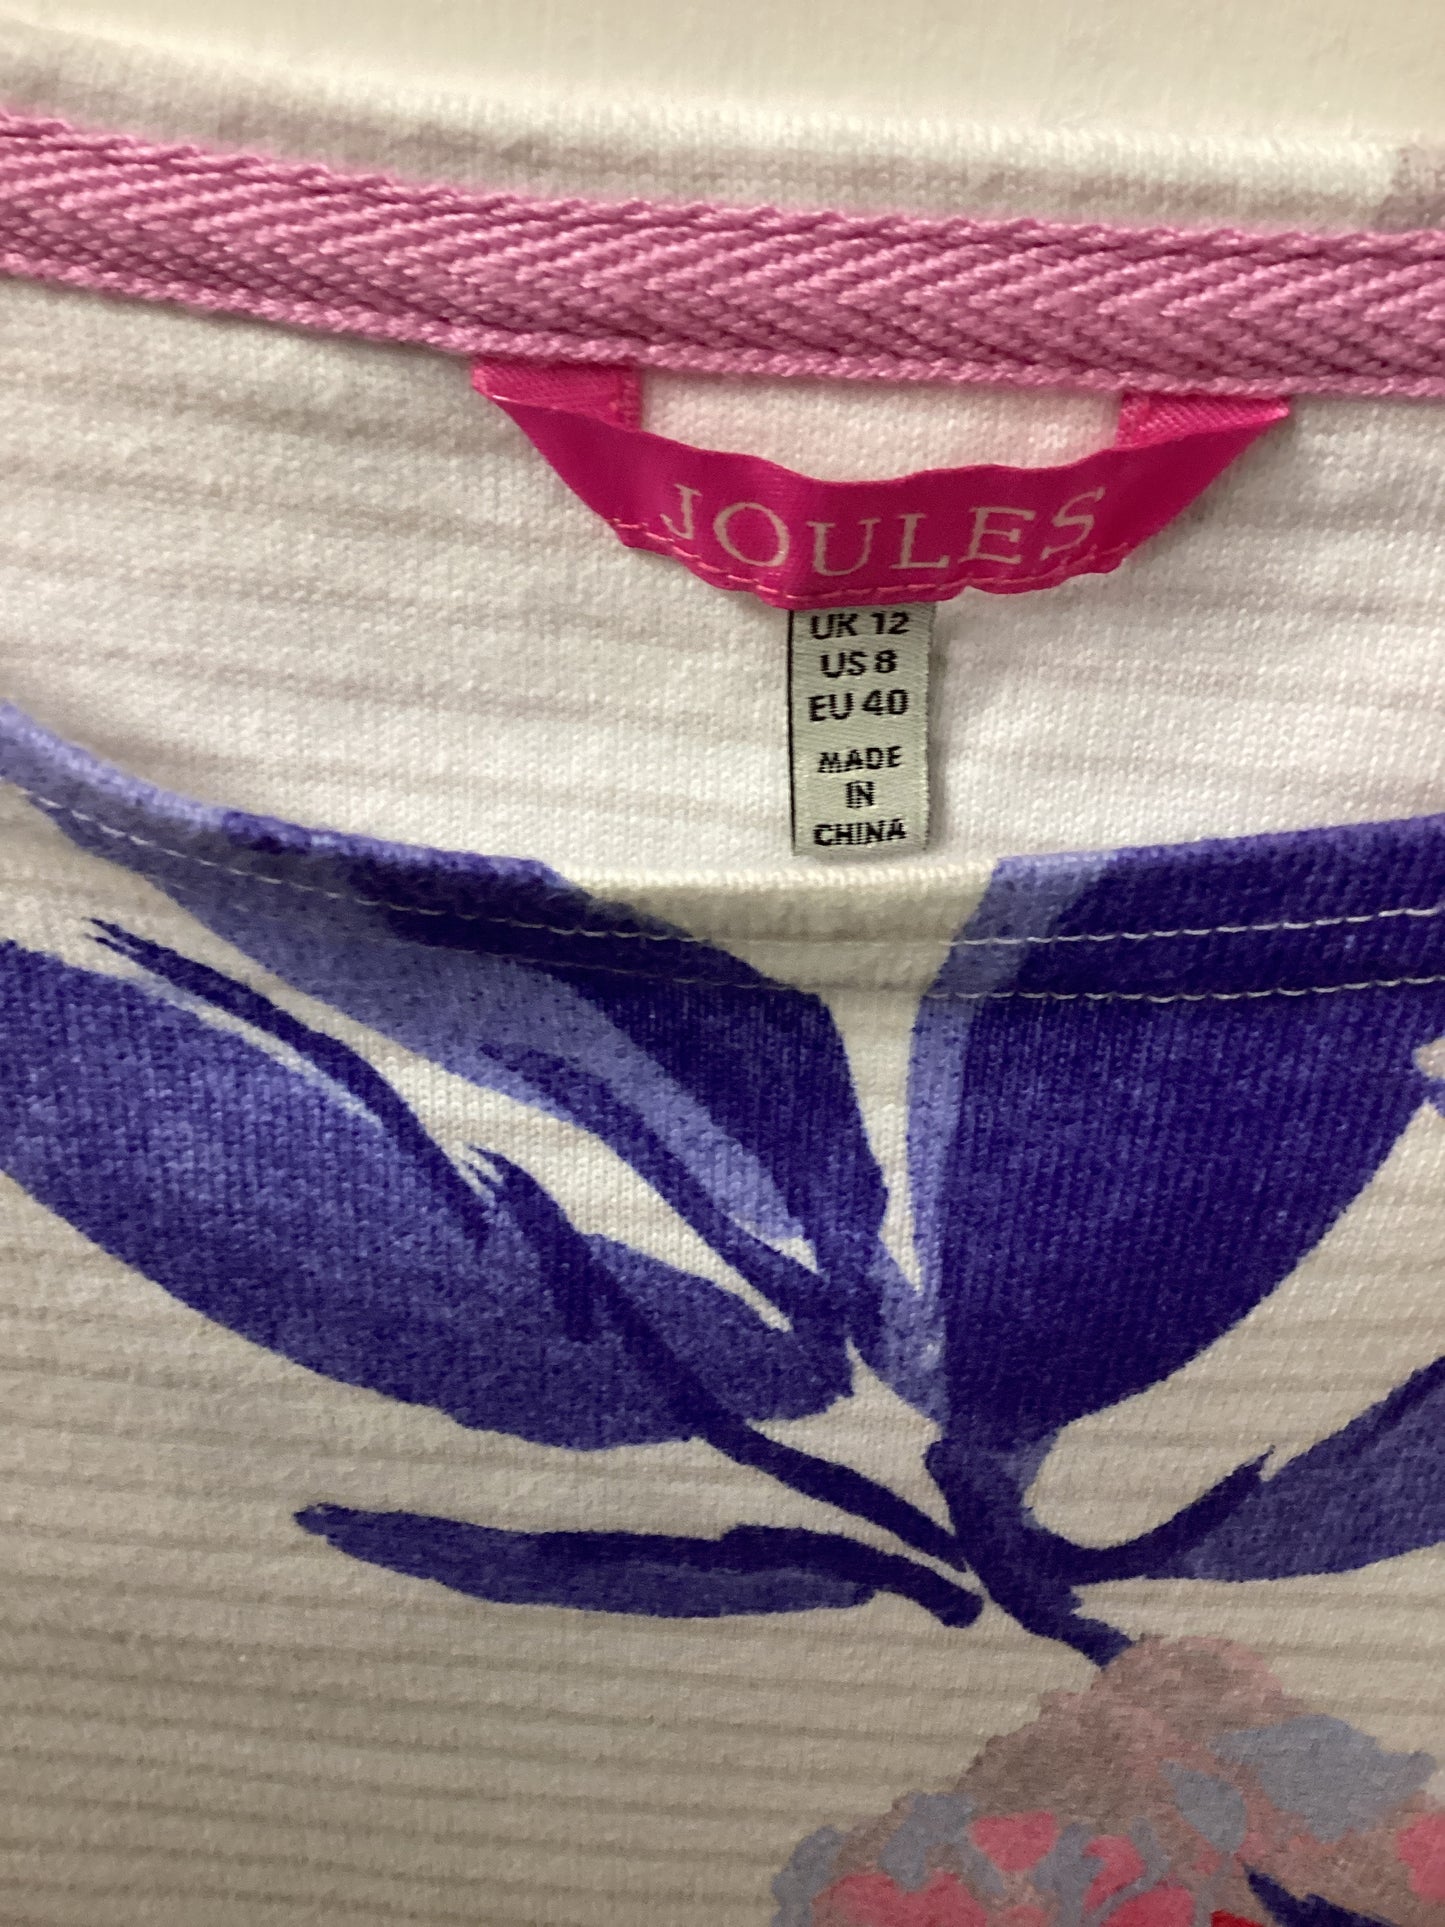 Joules White Floral Pattern Short Sleeve Dress Size UK 12